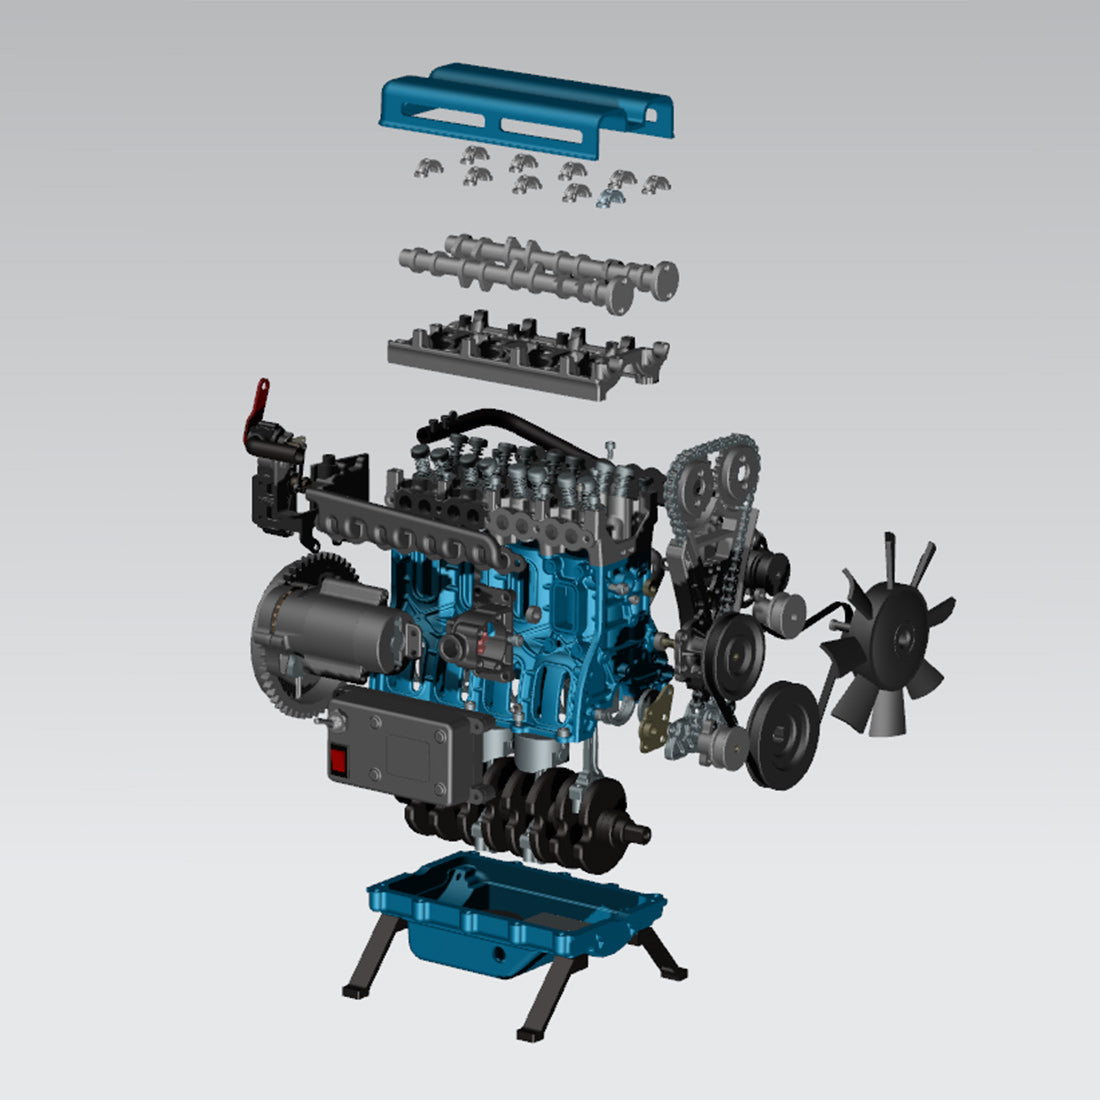 TECHING Updated L4 Engine Model Kit that Works - Build Your Own Engine - Full Metal 4 Cylinder Car Engine Kit Car Engine Model - ENGINEDIY